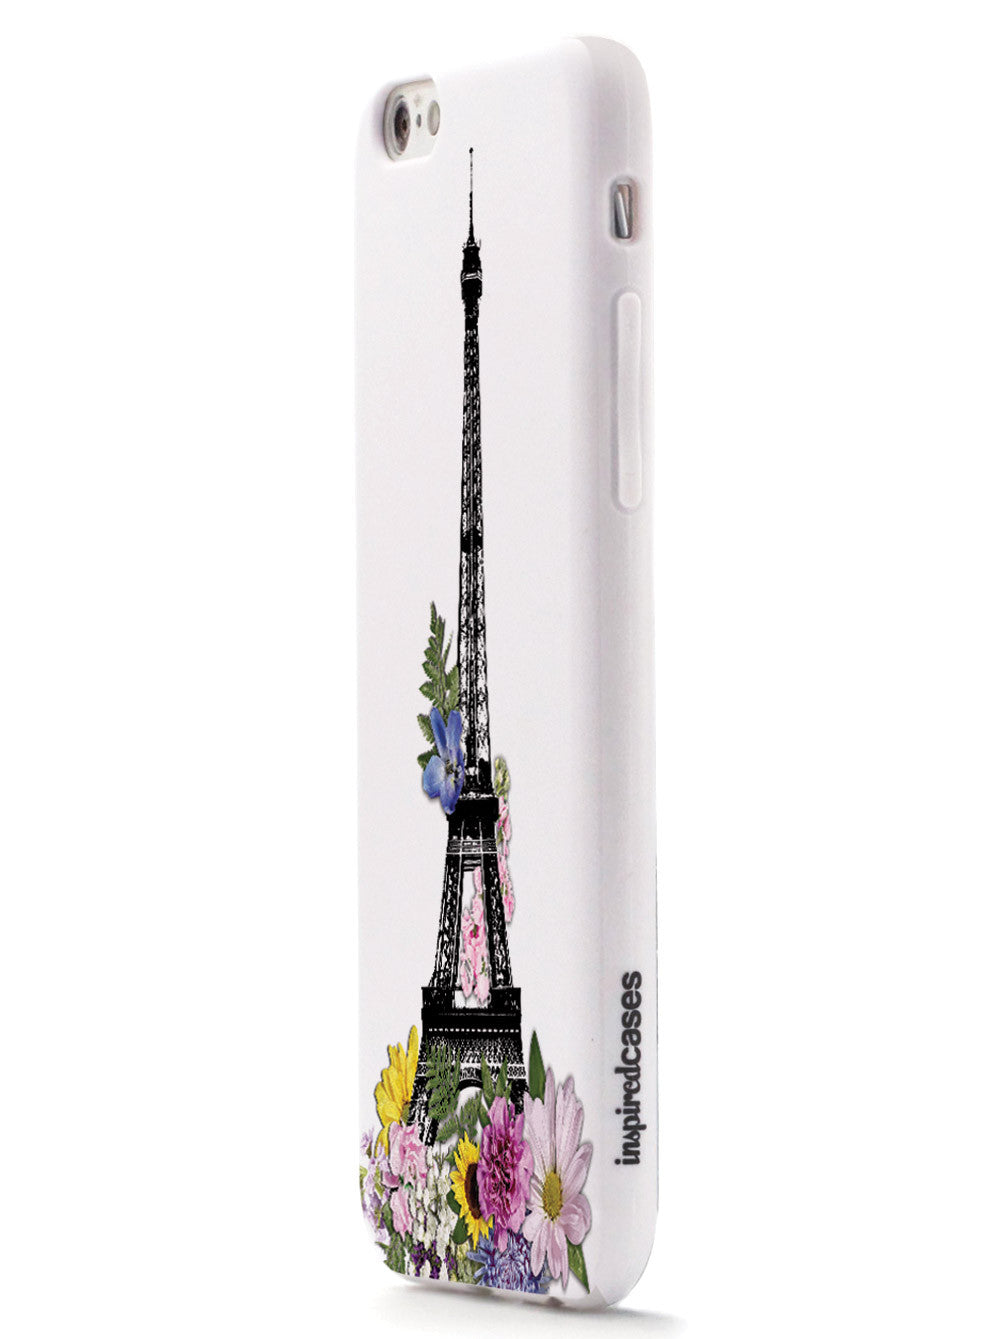 Eiffel Tower Drawing and Flowers - White Case